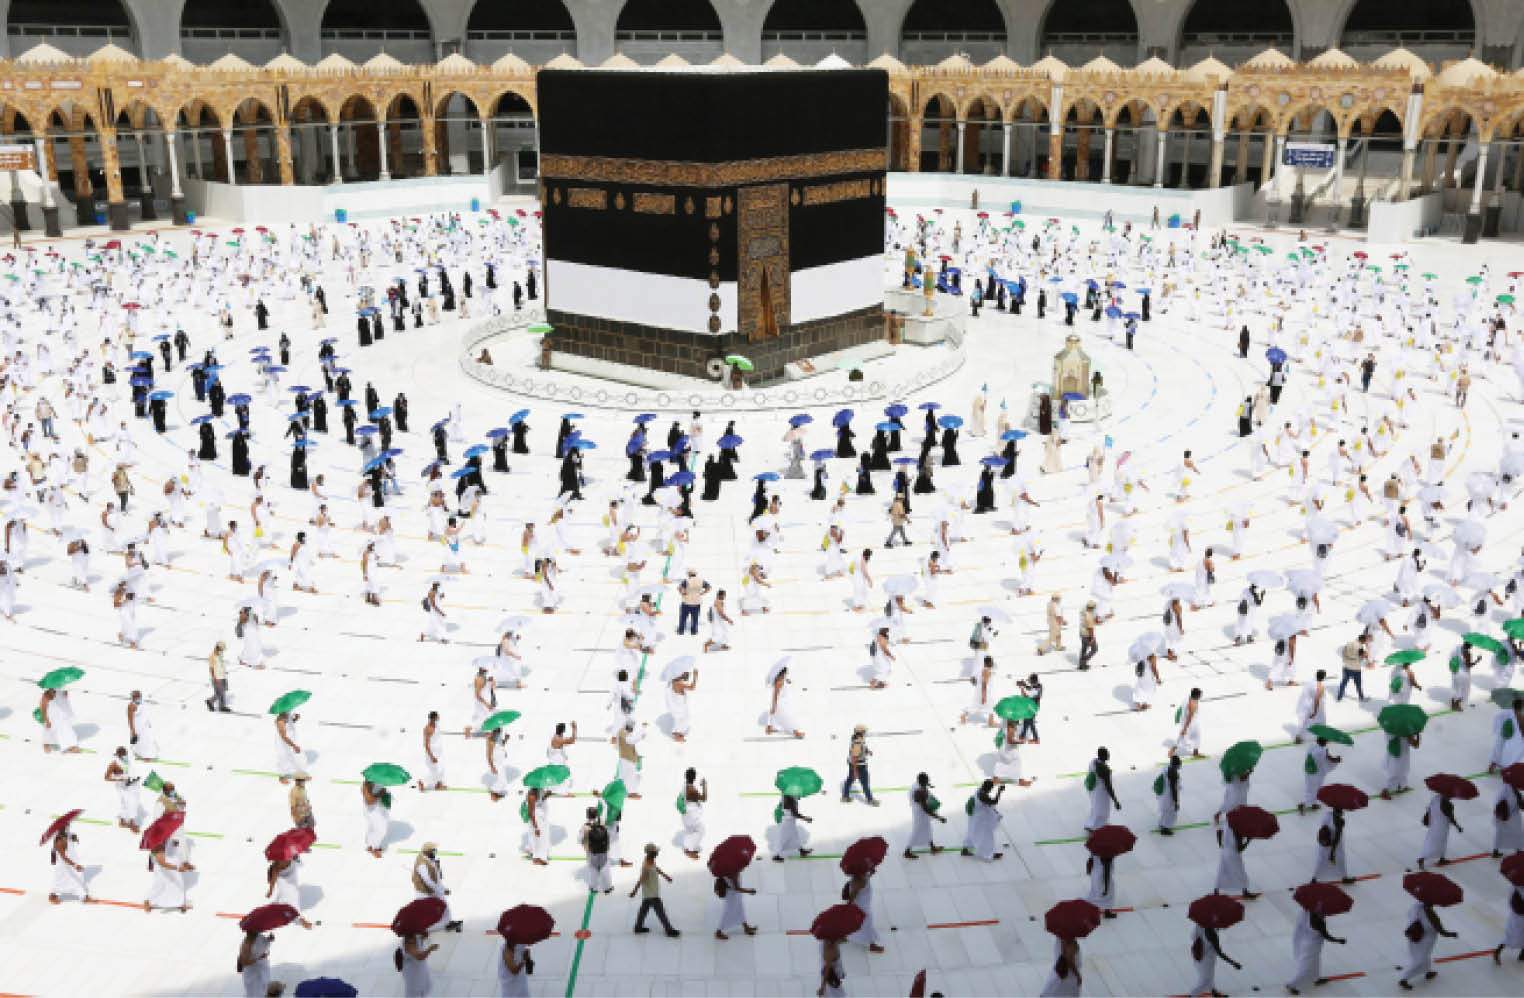 Pilgrims hold coloured umbrellas along matching coloured rings separating them as part of measures to contain the spread of coronavirus while circumambulating around the Kaaba, at the centre of the Grand Mosque in the holy city of Mecca yesterday, at the start of the annual Muslim Hajj pilgrimage. (left) Male pilgrims praying inside the Grand Mosque